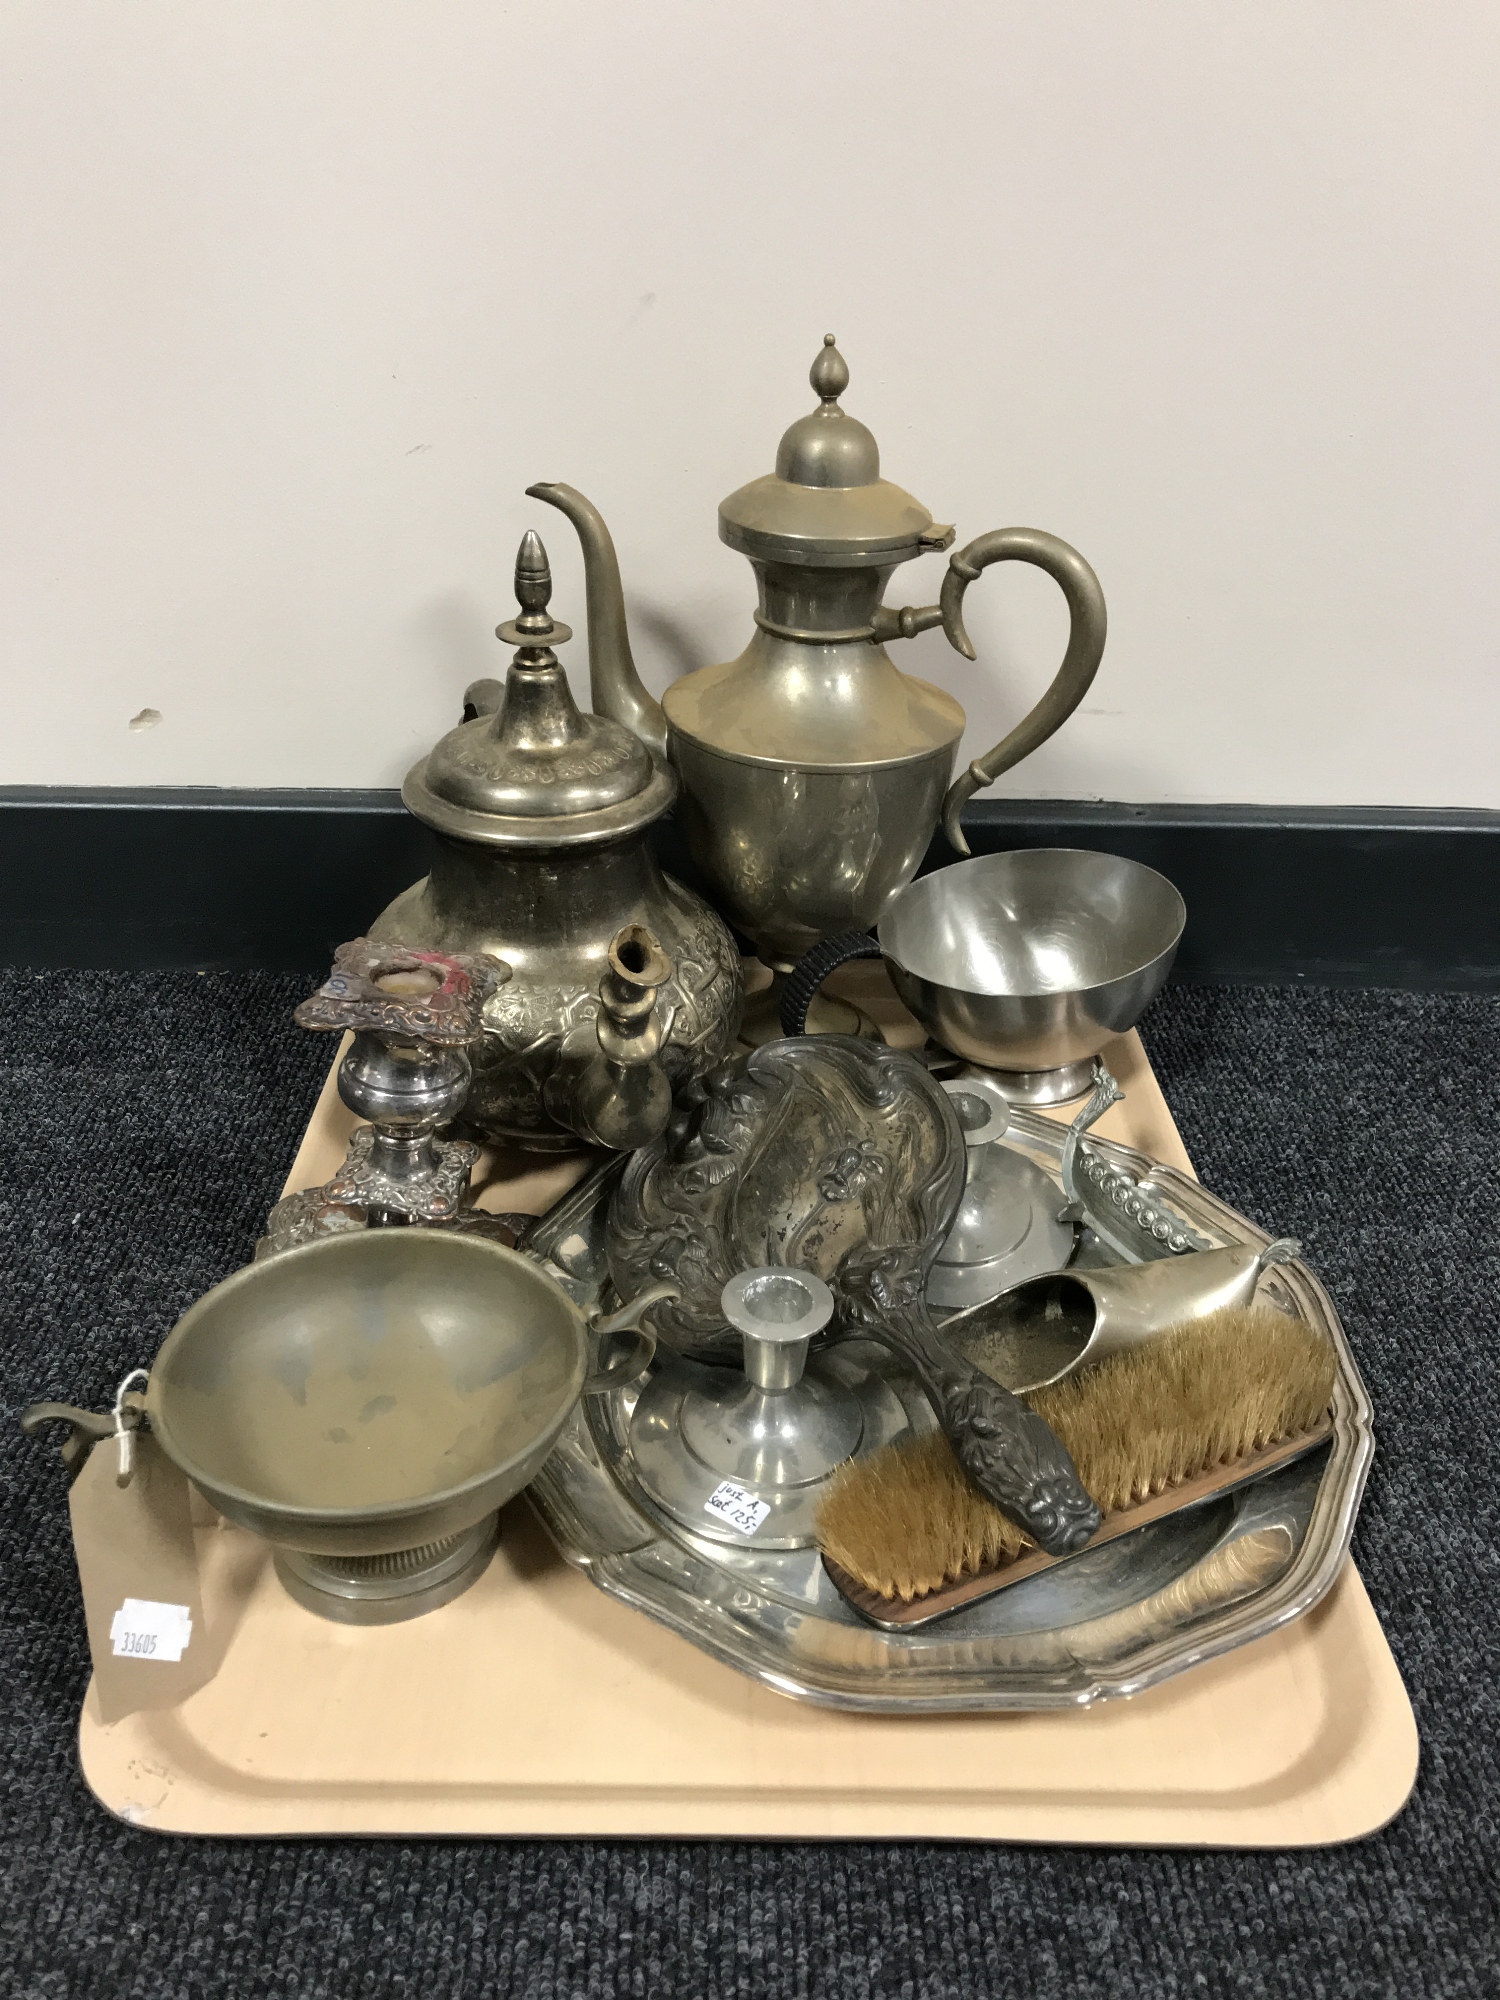 A tray of twentieth century plated ware including teapots, candlesticks,